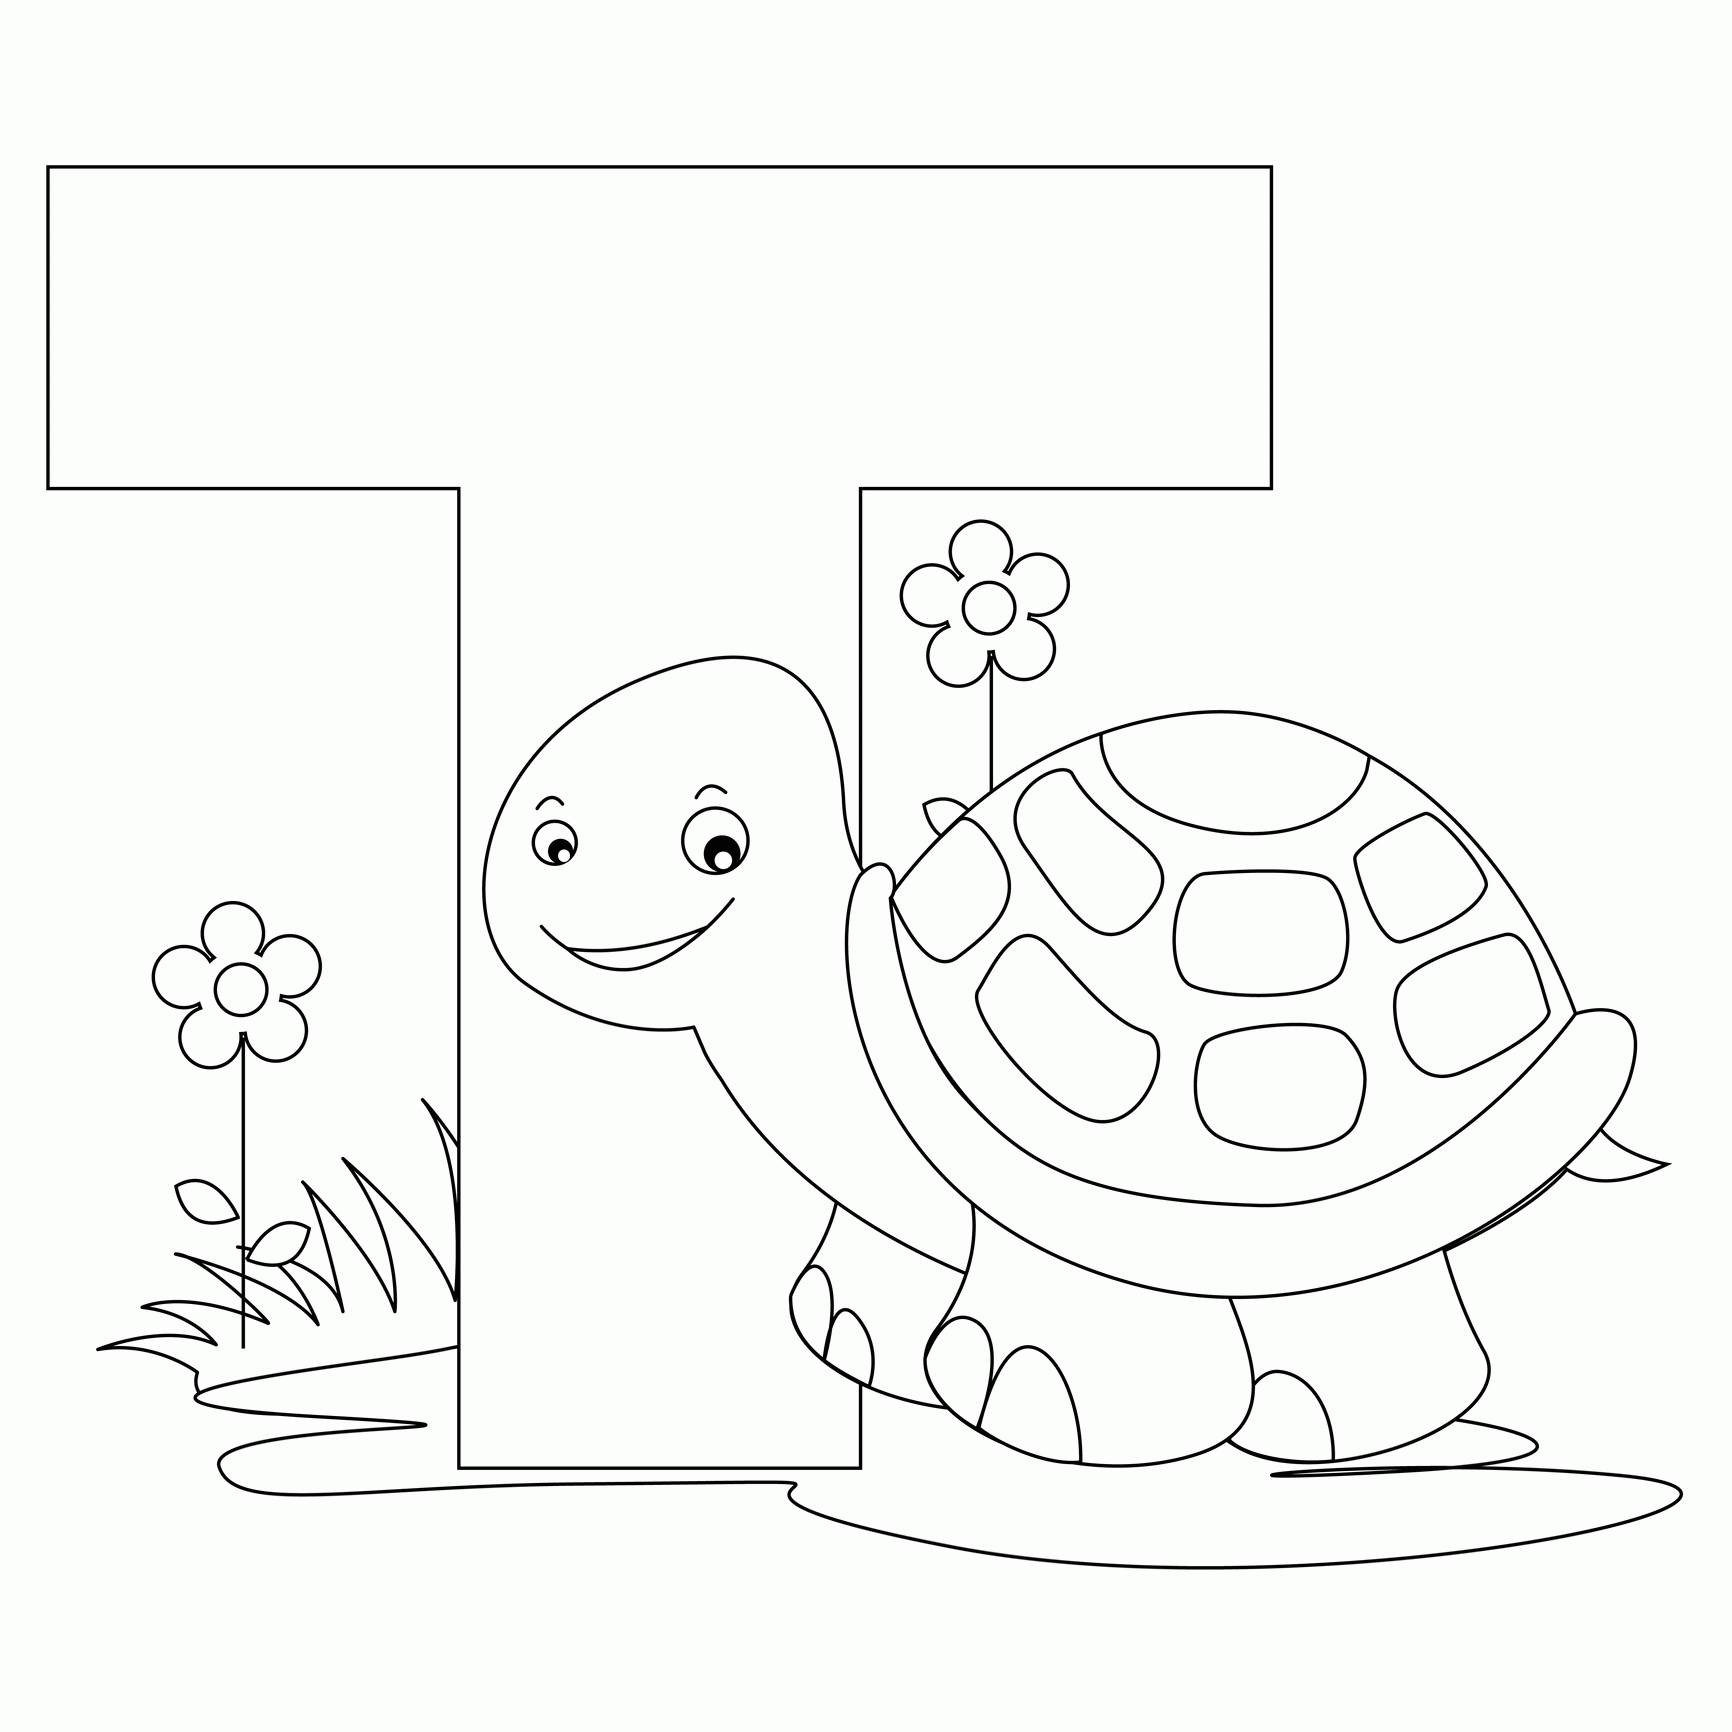 Letter T Coloring Page - Coloring Pages for Kids and for Adults